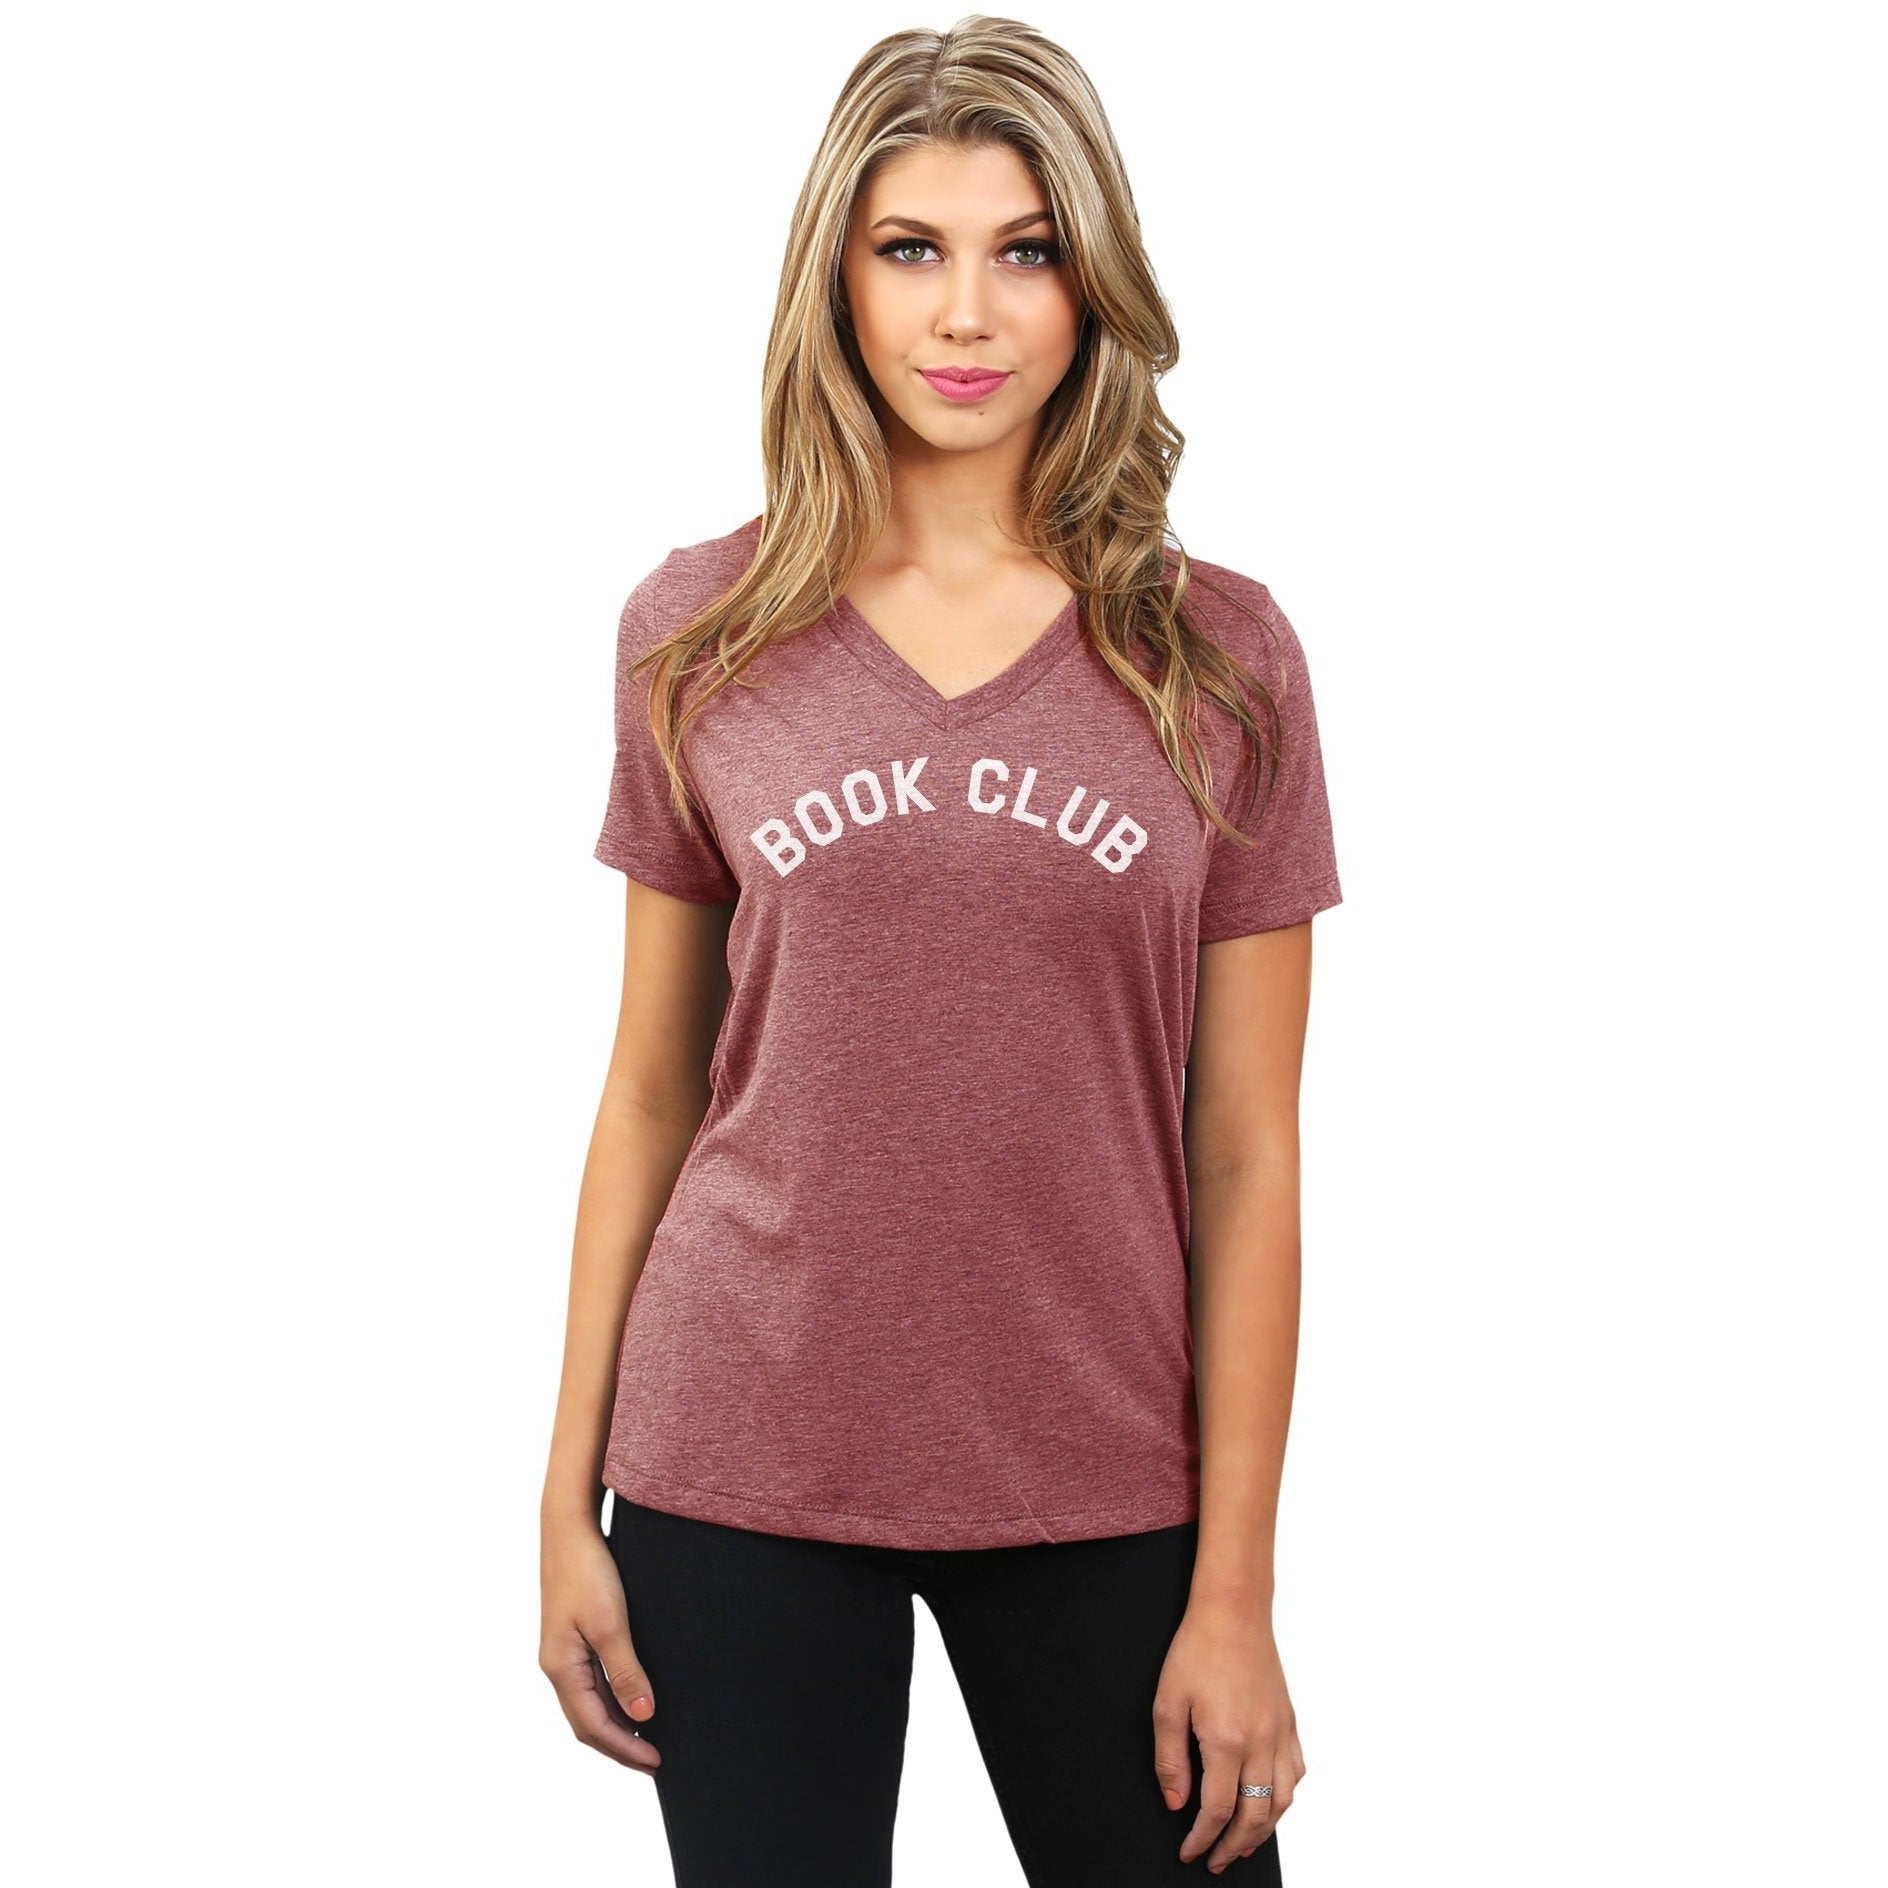 Book Club Women's Relaxed Crewneck T-Shirt Top Tee Heather Rouge Model
